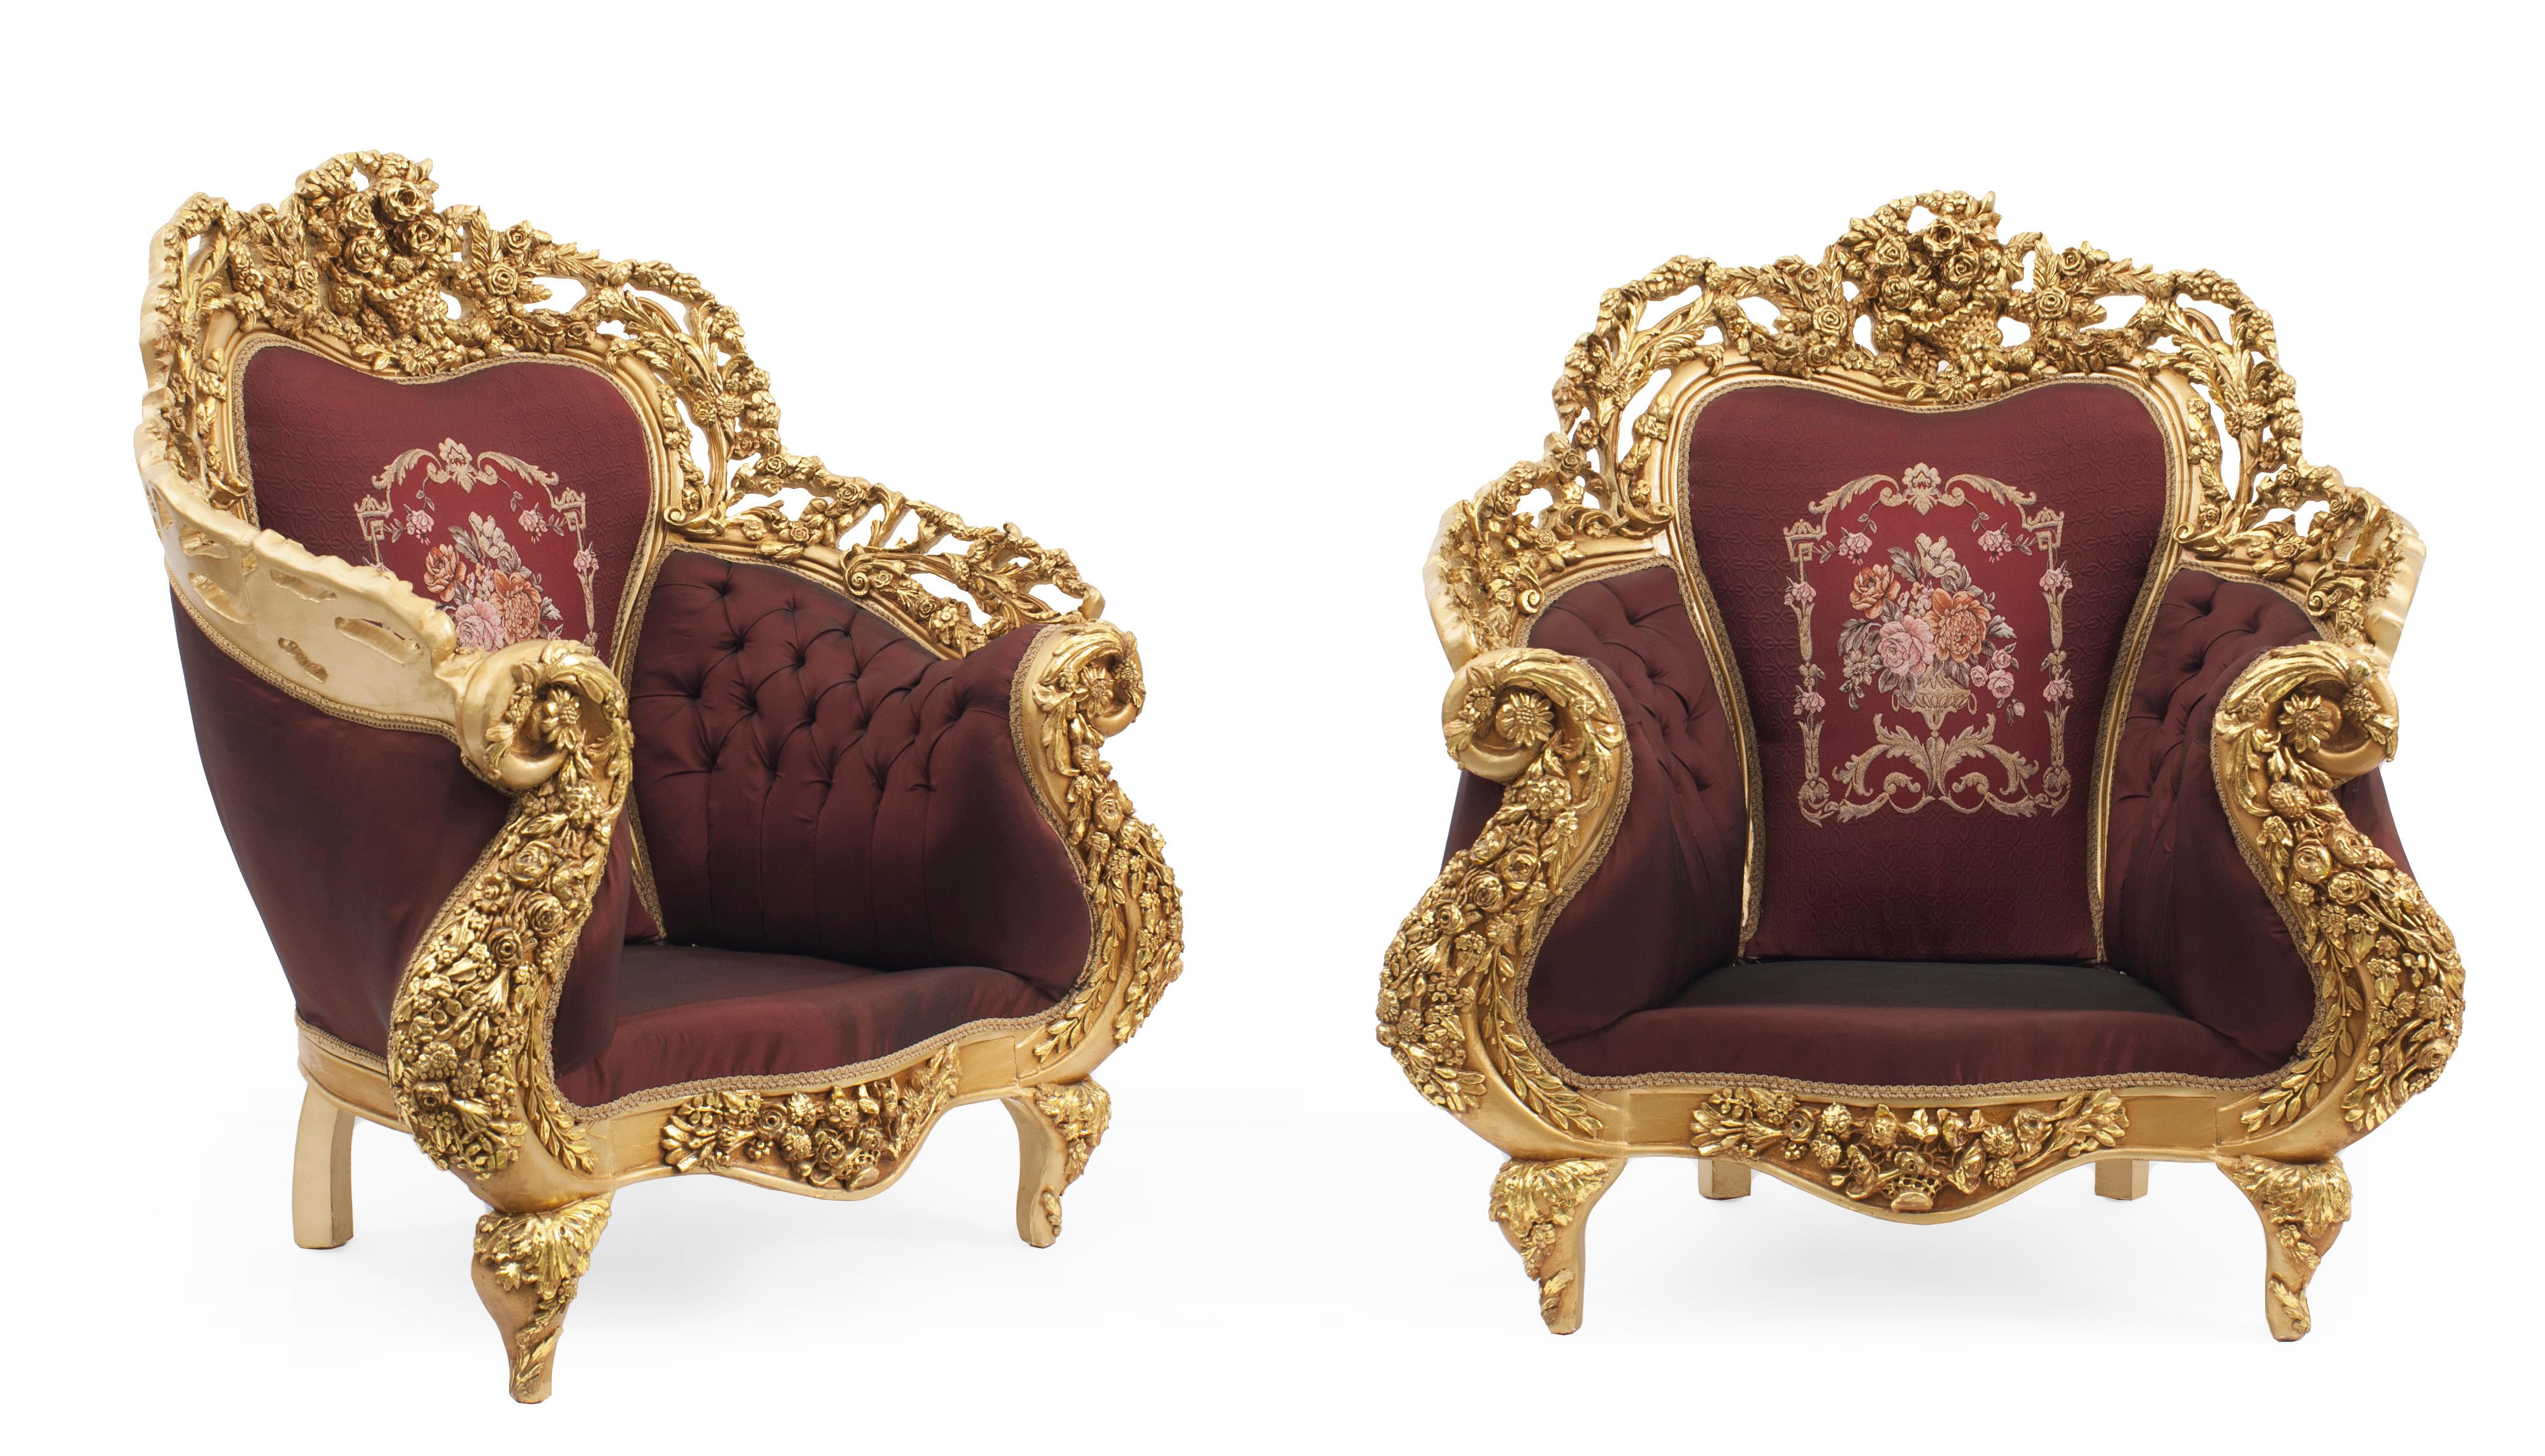 Pair of Italian Baroque style 20th century armchairs with gilt wood filigree frames & burgundy button-tufted upholstery with embroidered flowers and burgundy velvet seat cushions.